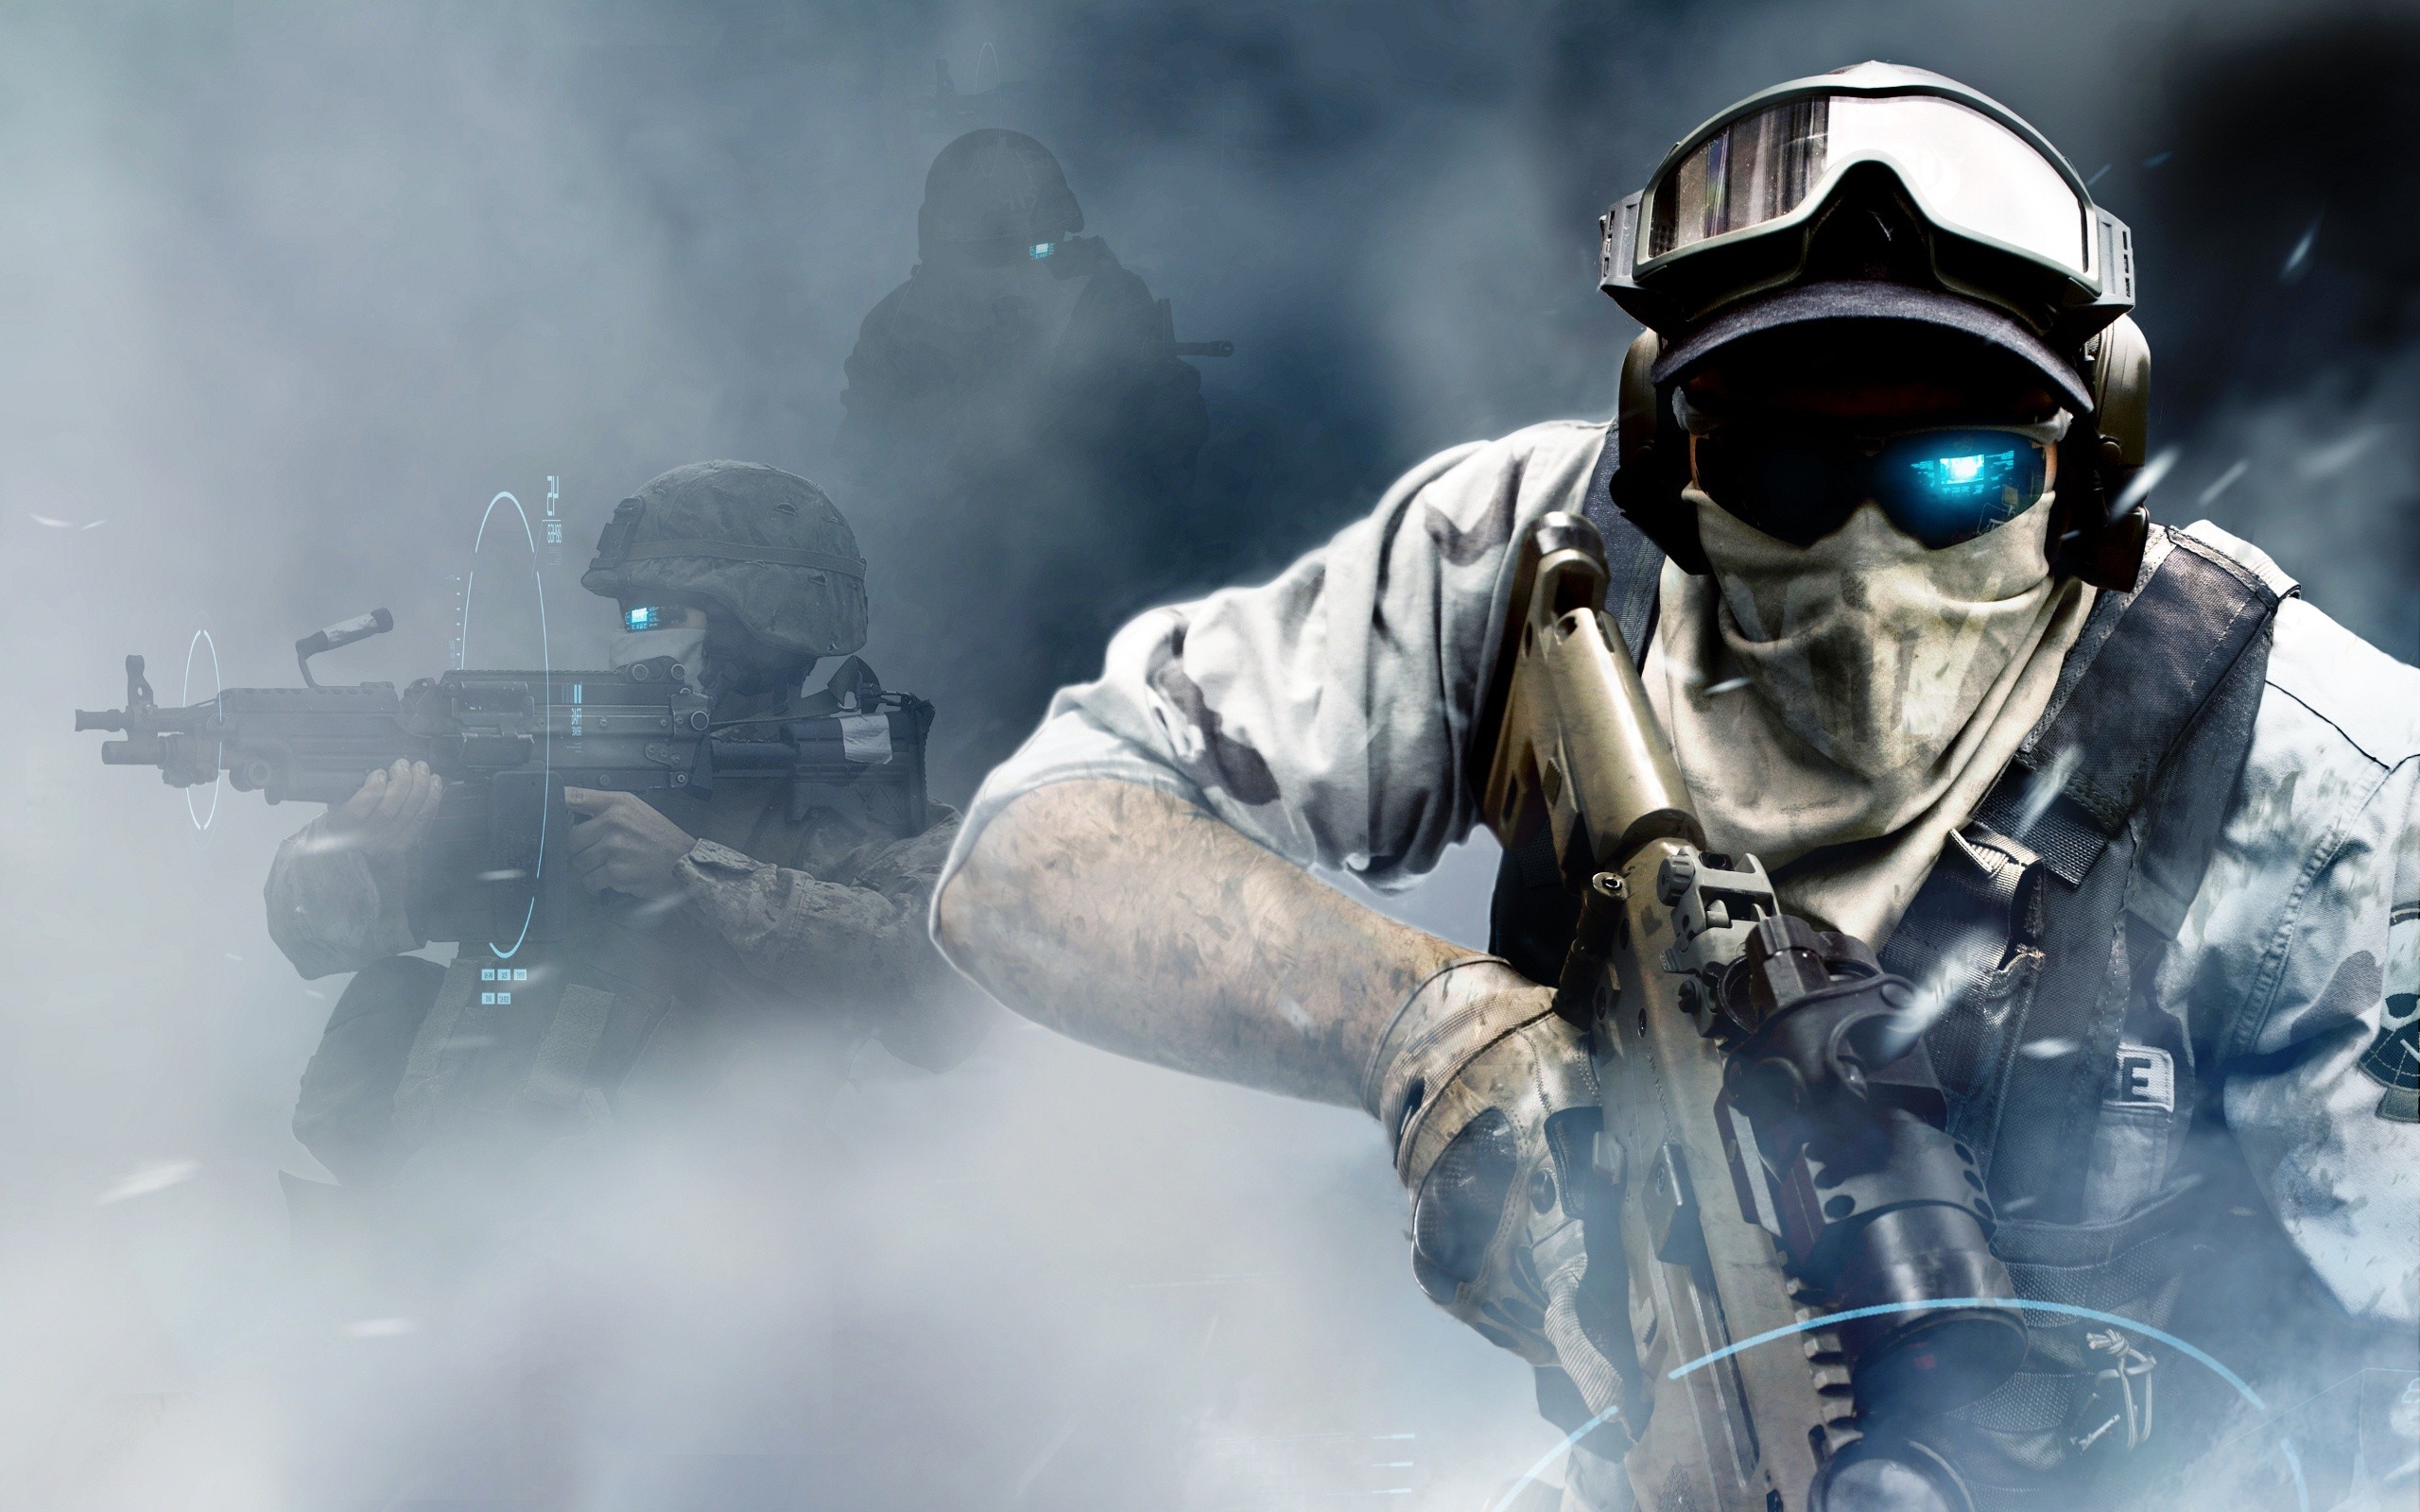 special Forces, Assault Rifle, Machine Gun, Smoke, Tactical, SCAR, Ghost Recon Wallpaper